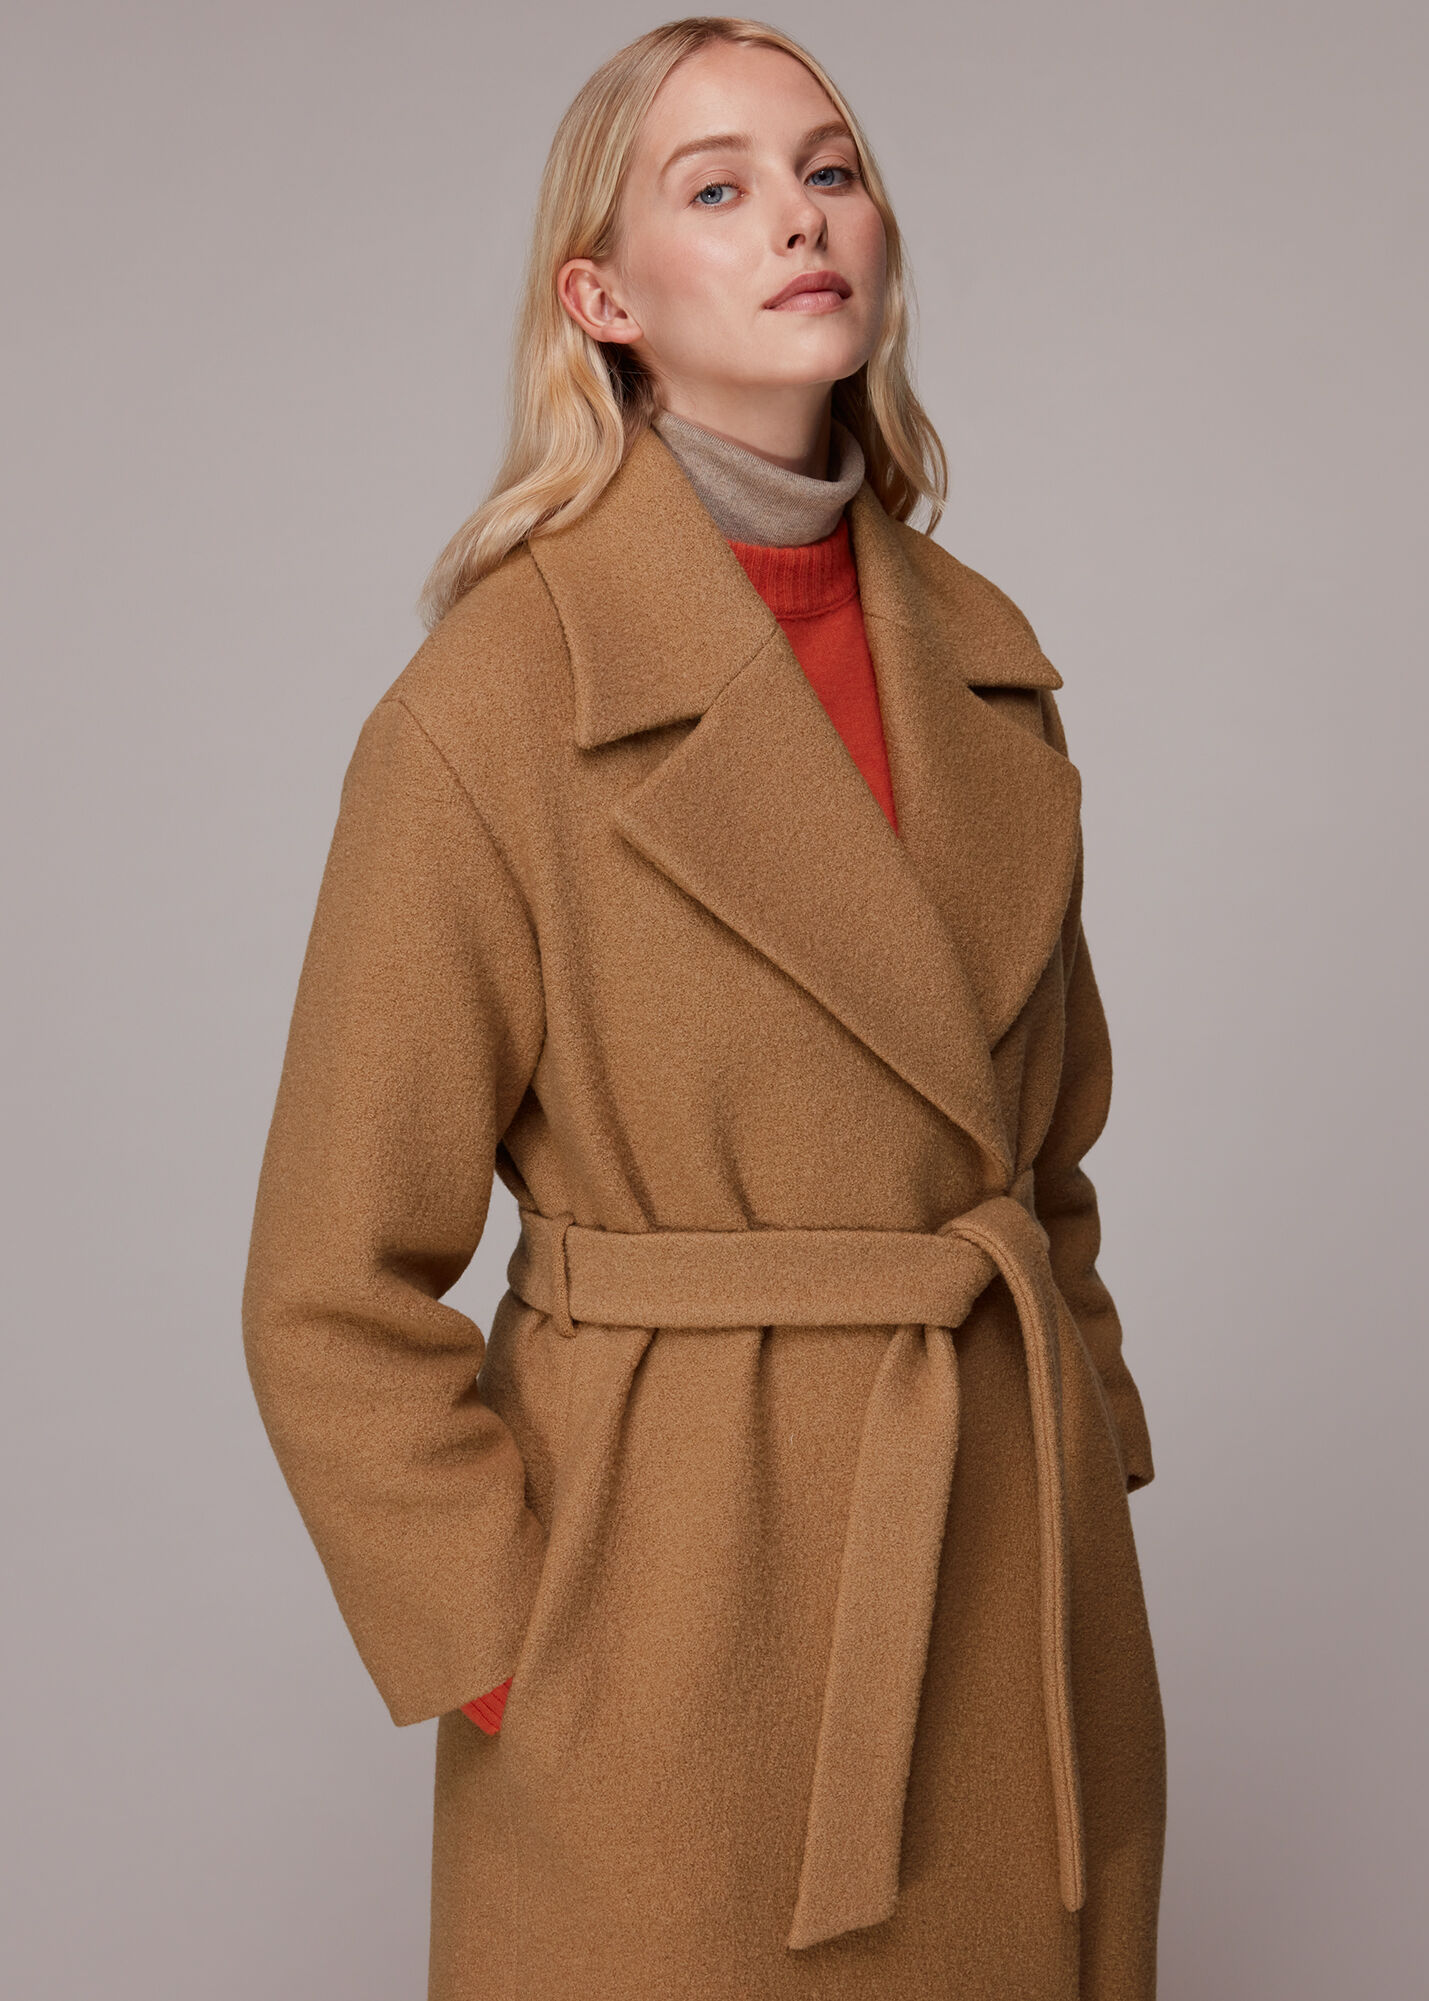 Camel Wool Belted Wrap Coat with Tie Waist, Whistles